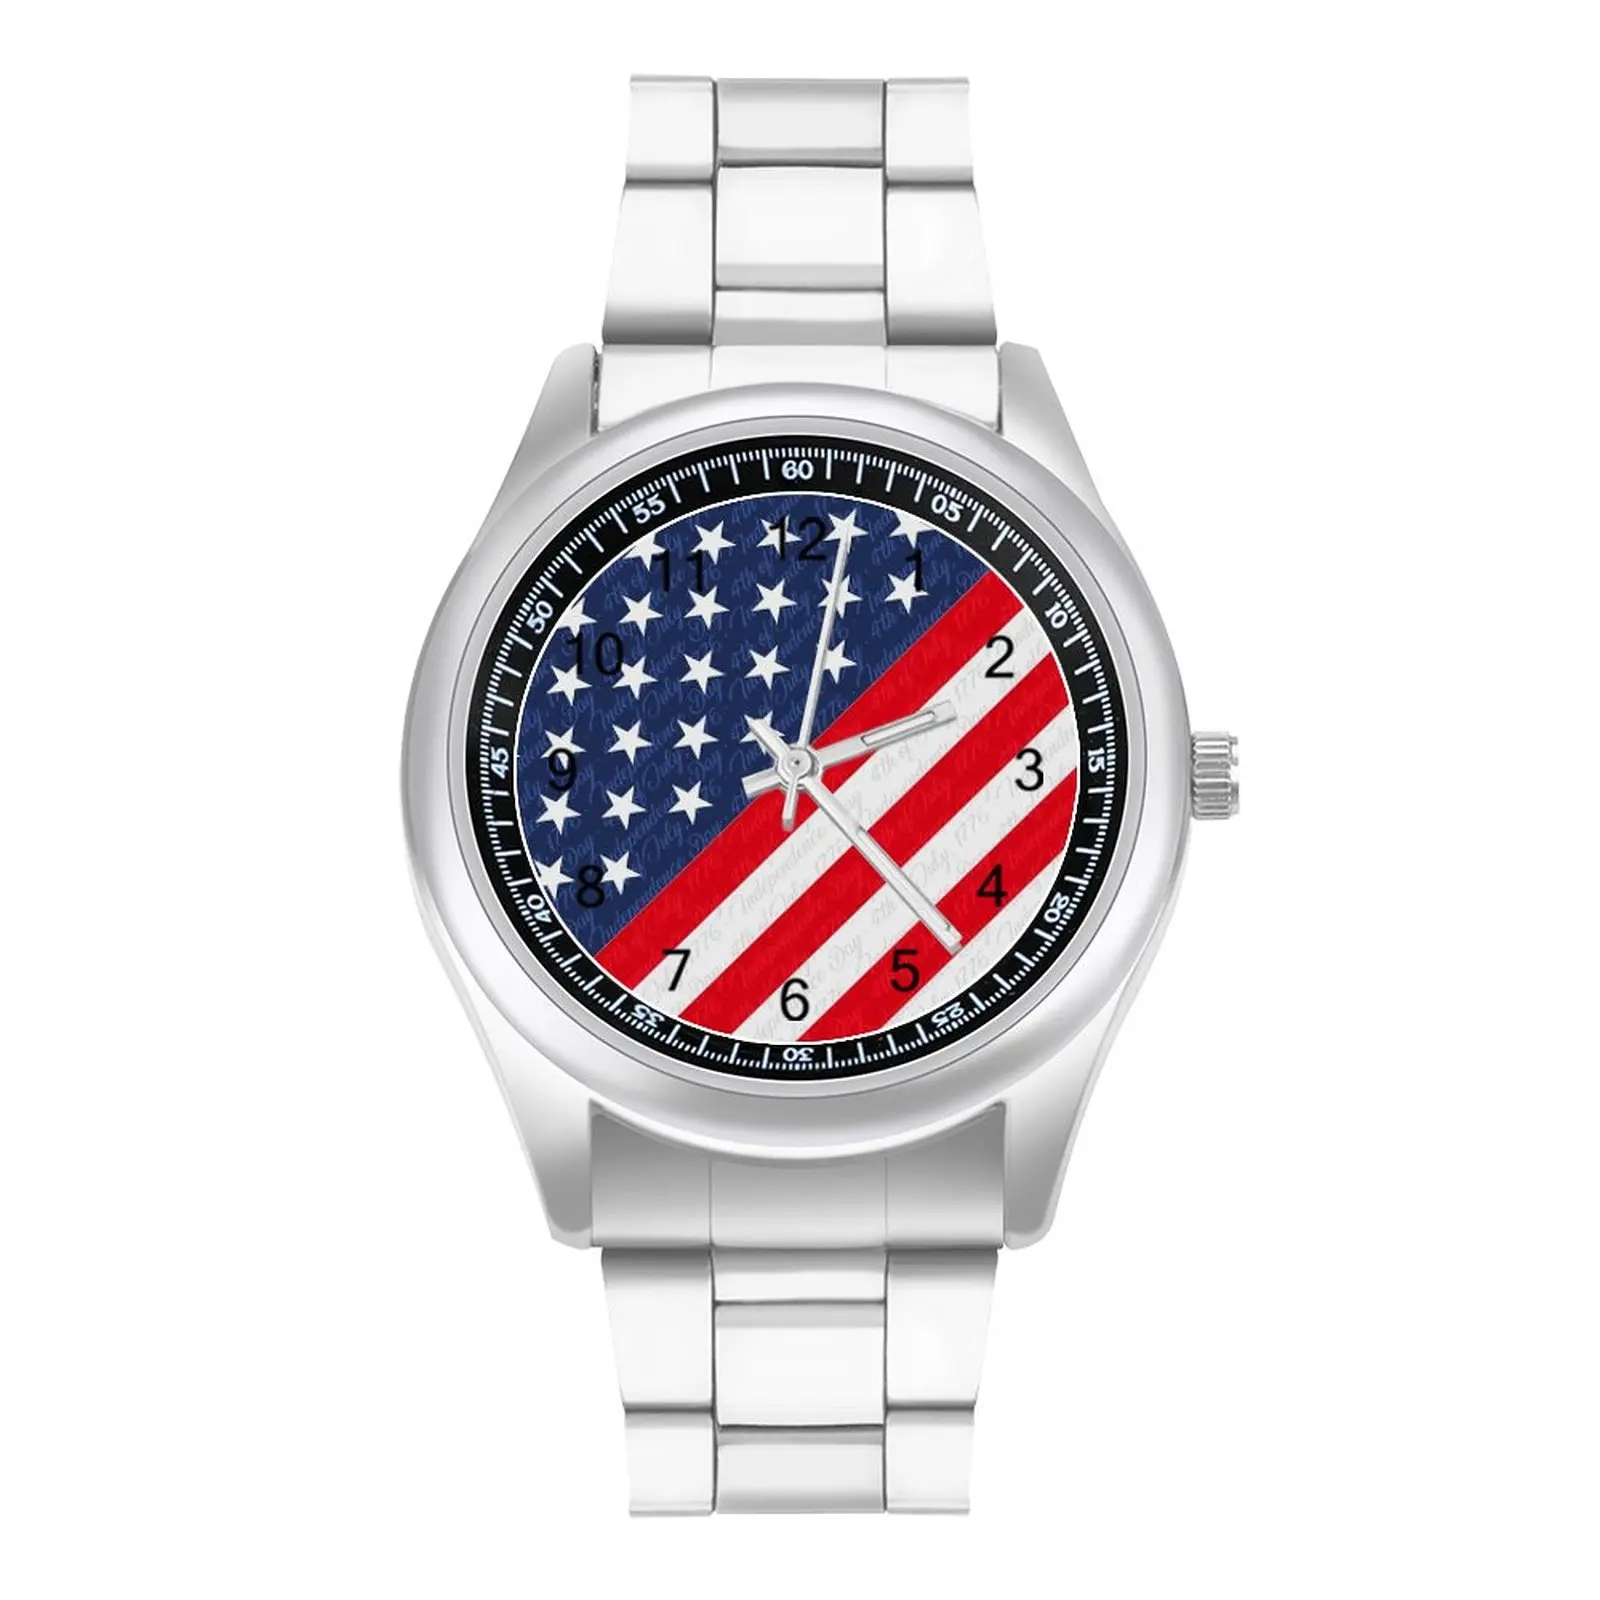 

USA 4th of July Quartz Watch Independence Day Sports Aesthetic Wrist Watches Stainless Photo Analog Female Wristwatch